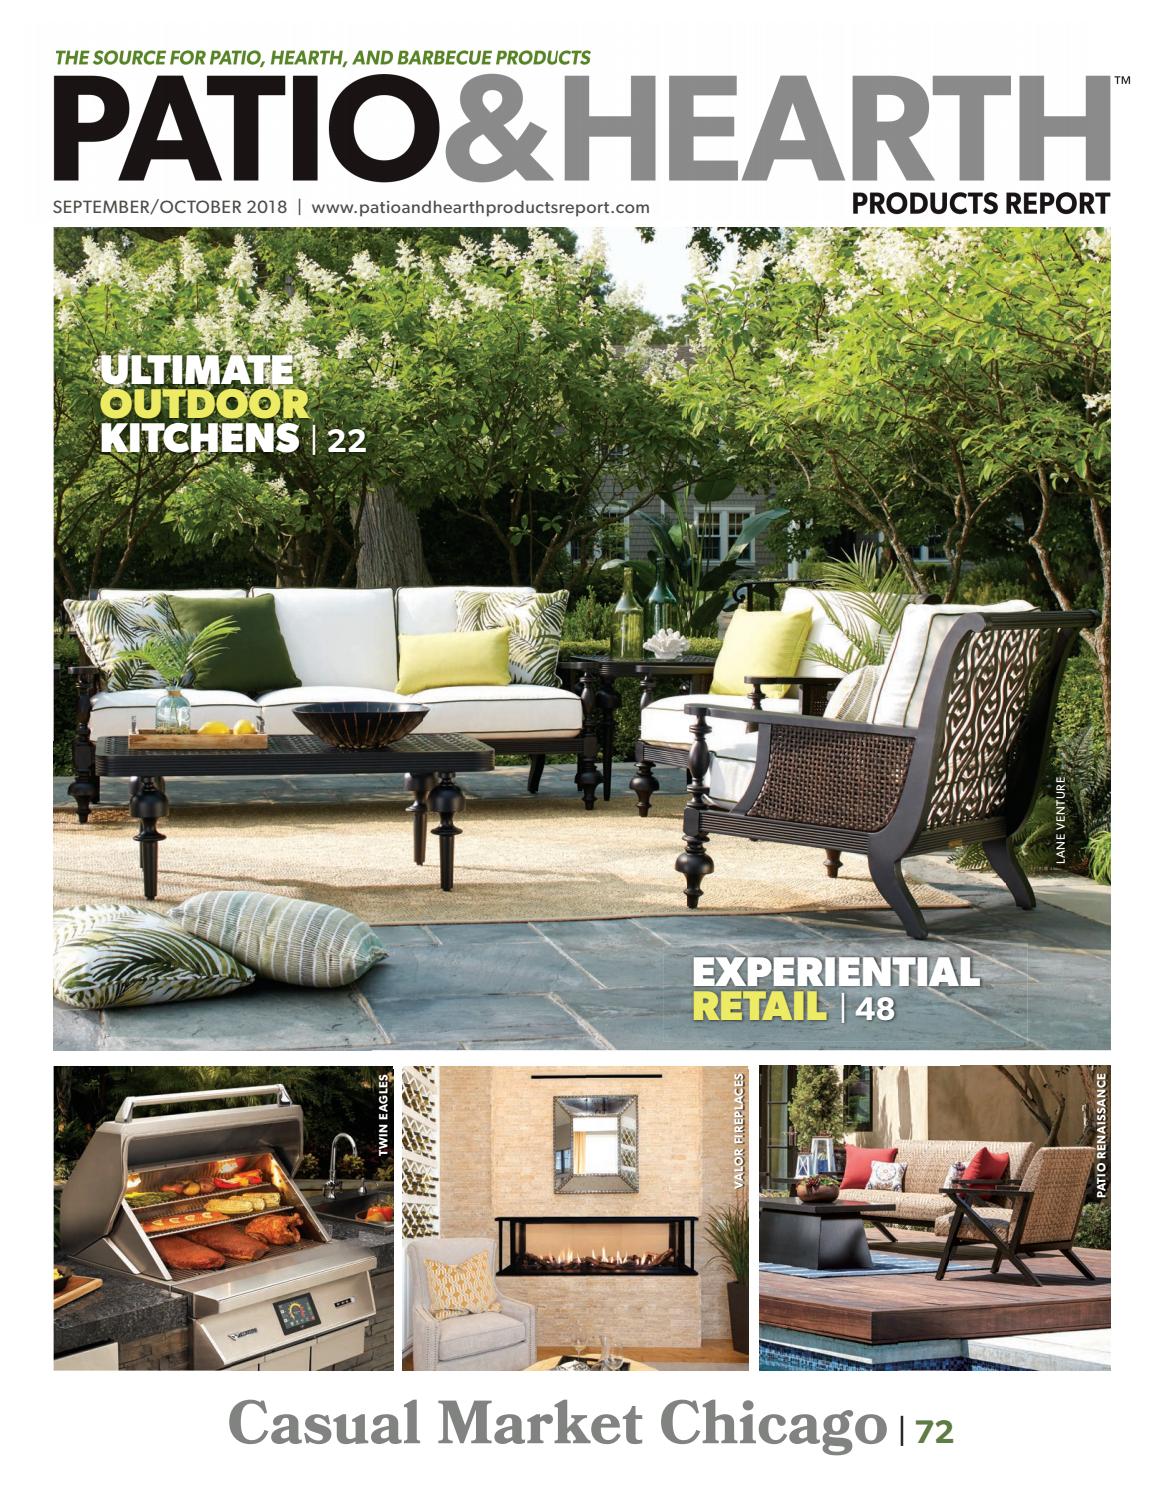 Fireplace Store Las Vegas Awesome Patio & Hearth Products Report September October 2018 by